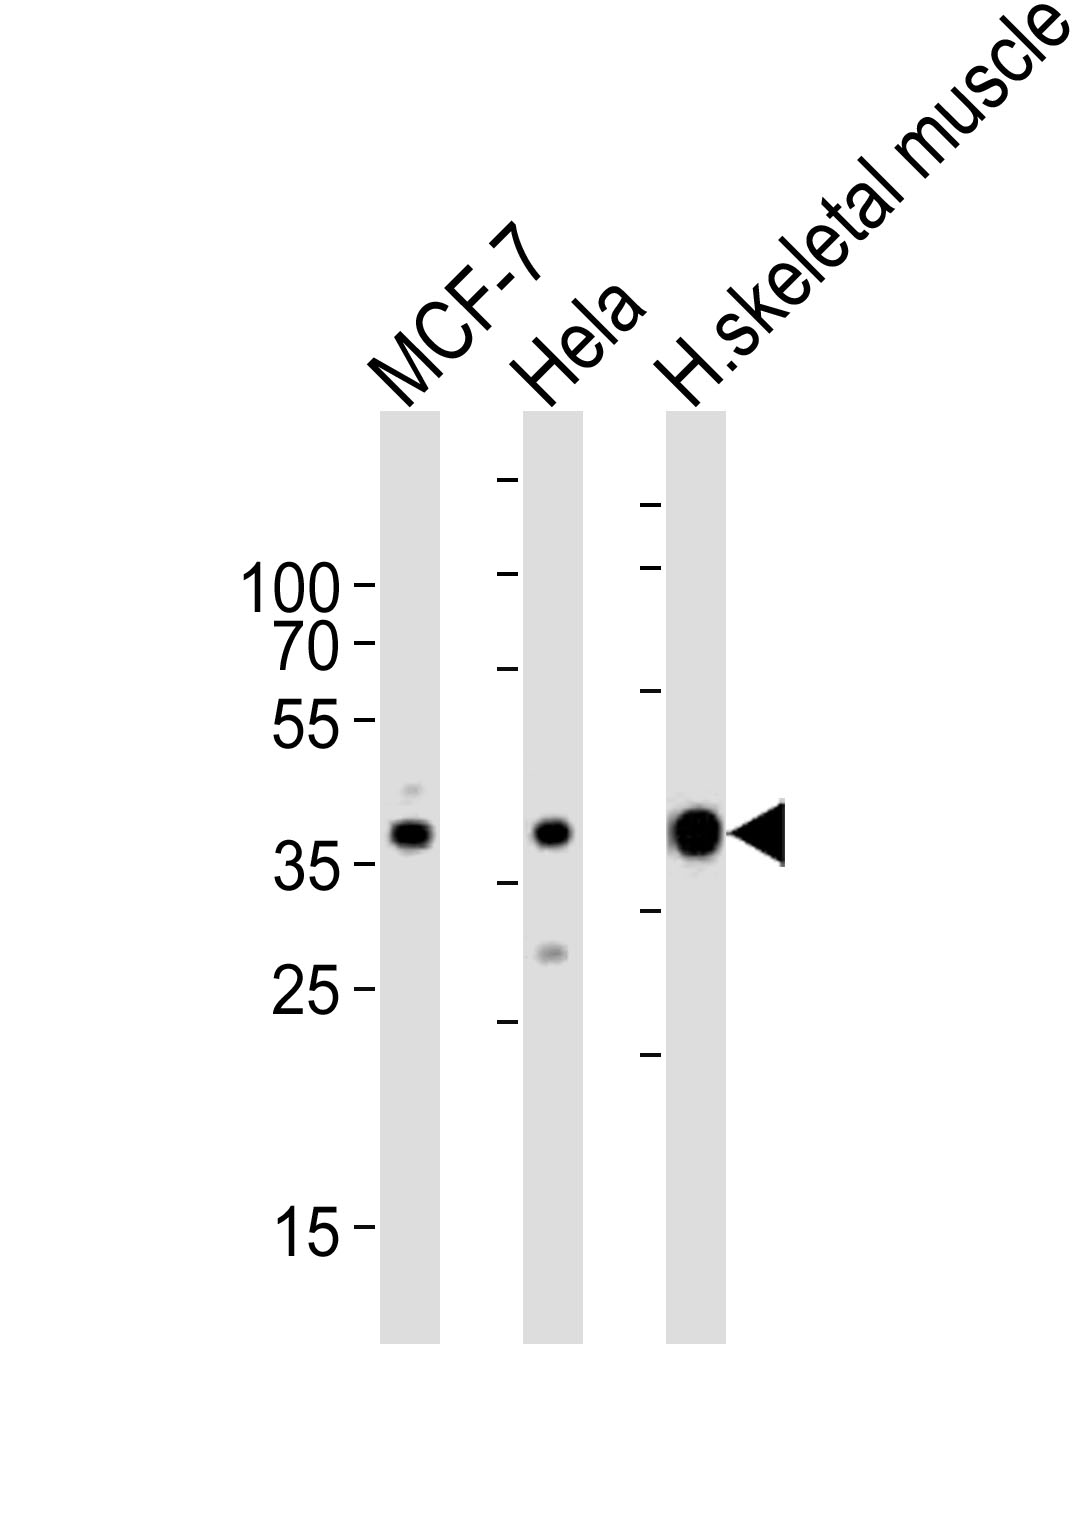 Western blot analysis of lysates from MCF-7, Hela cell line and human skeletal muscle tissue lysate (from left to right), using ALDOA Antibody (C-term)(Cat.  #AP2726b).  AP2726b was diluted at 1:1000 at each lane.  A goat anti-rabbit IgG H&L(HRP) at 1:10000 dilution was used as the secondary antibody. Lysates at 35ug per lane.